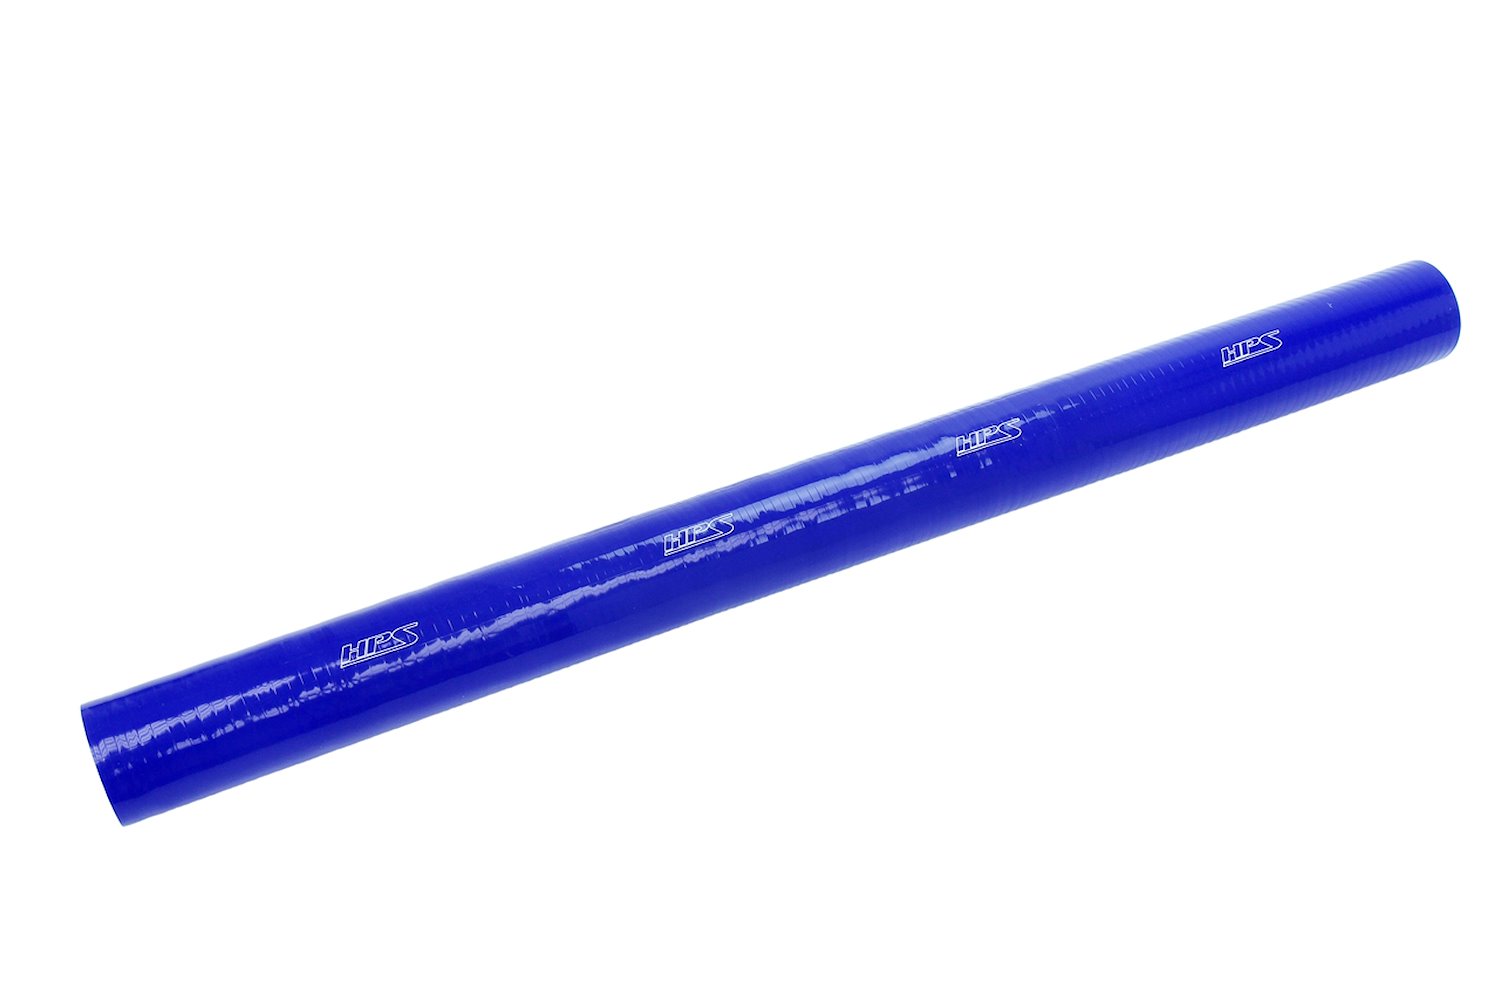 HTST-3F-550-BLUE Silicone Coolant Tube, High-Temp 6-Ply Reinforced, 5-1/2 in. ID, 3 ft. Long, Blue